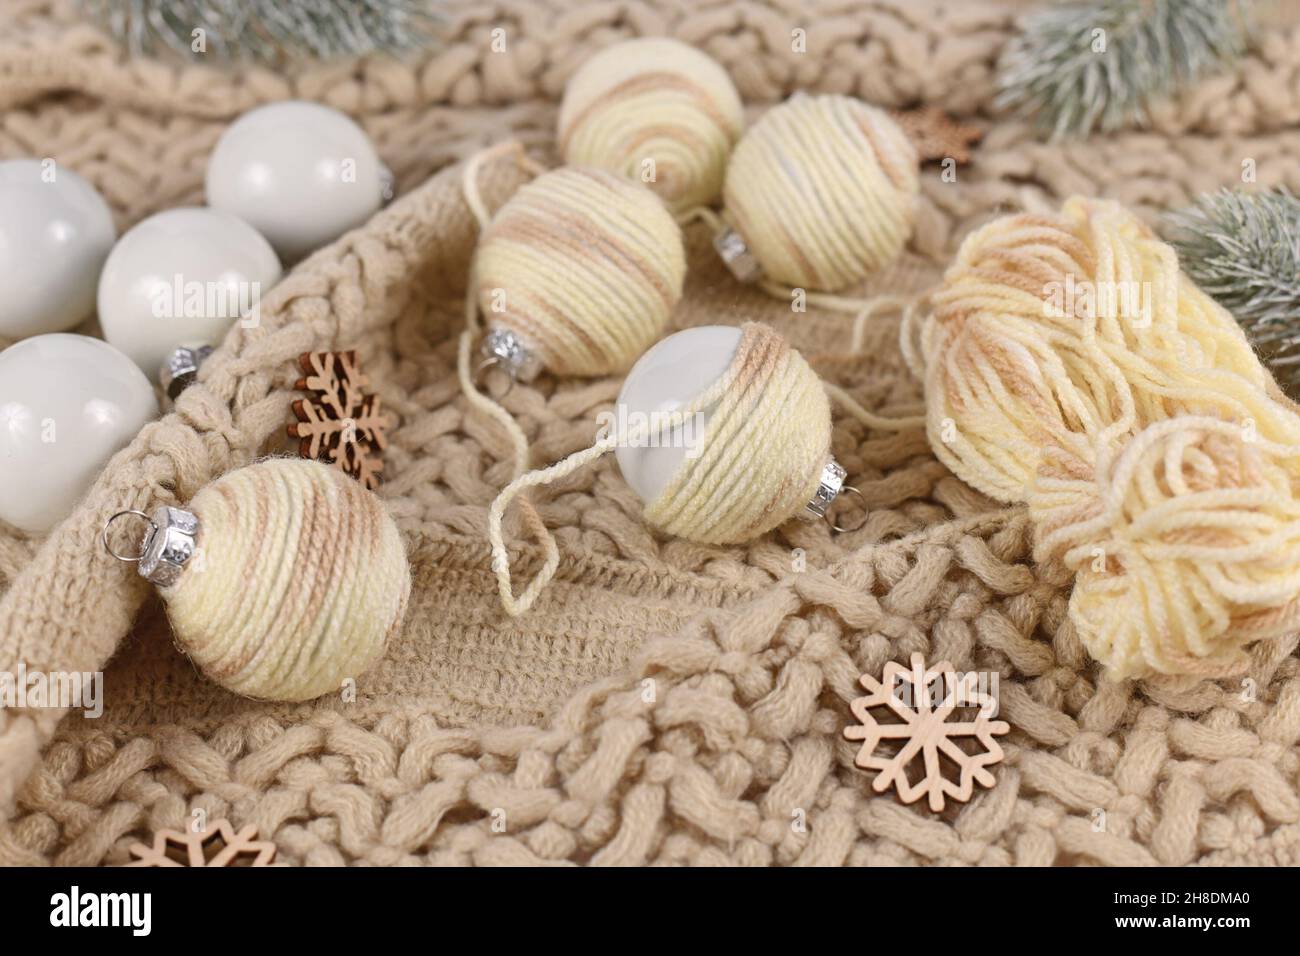 Boho style DIY Christmas bauble ornaments with with cream colored wool cord Stock Photo